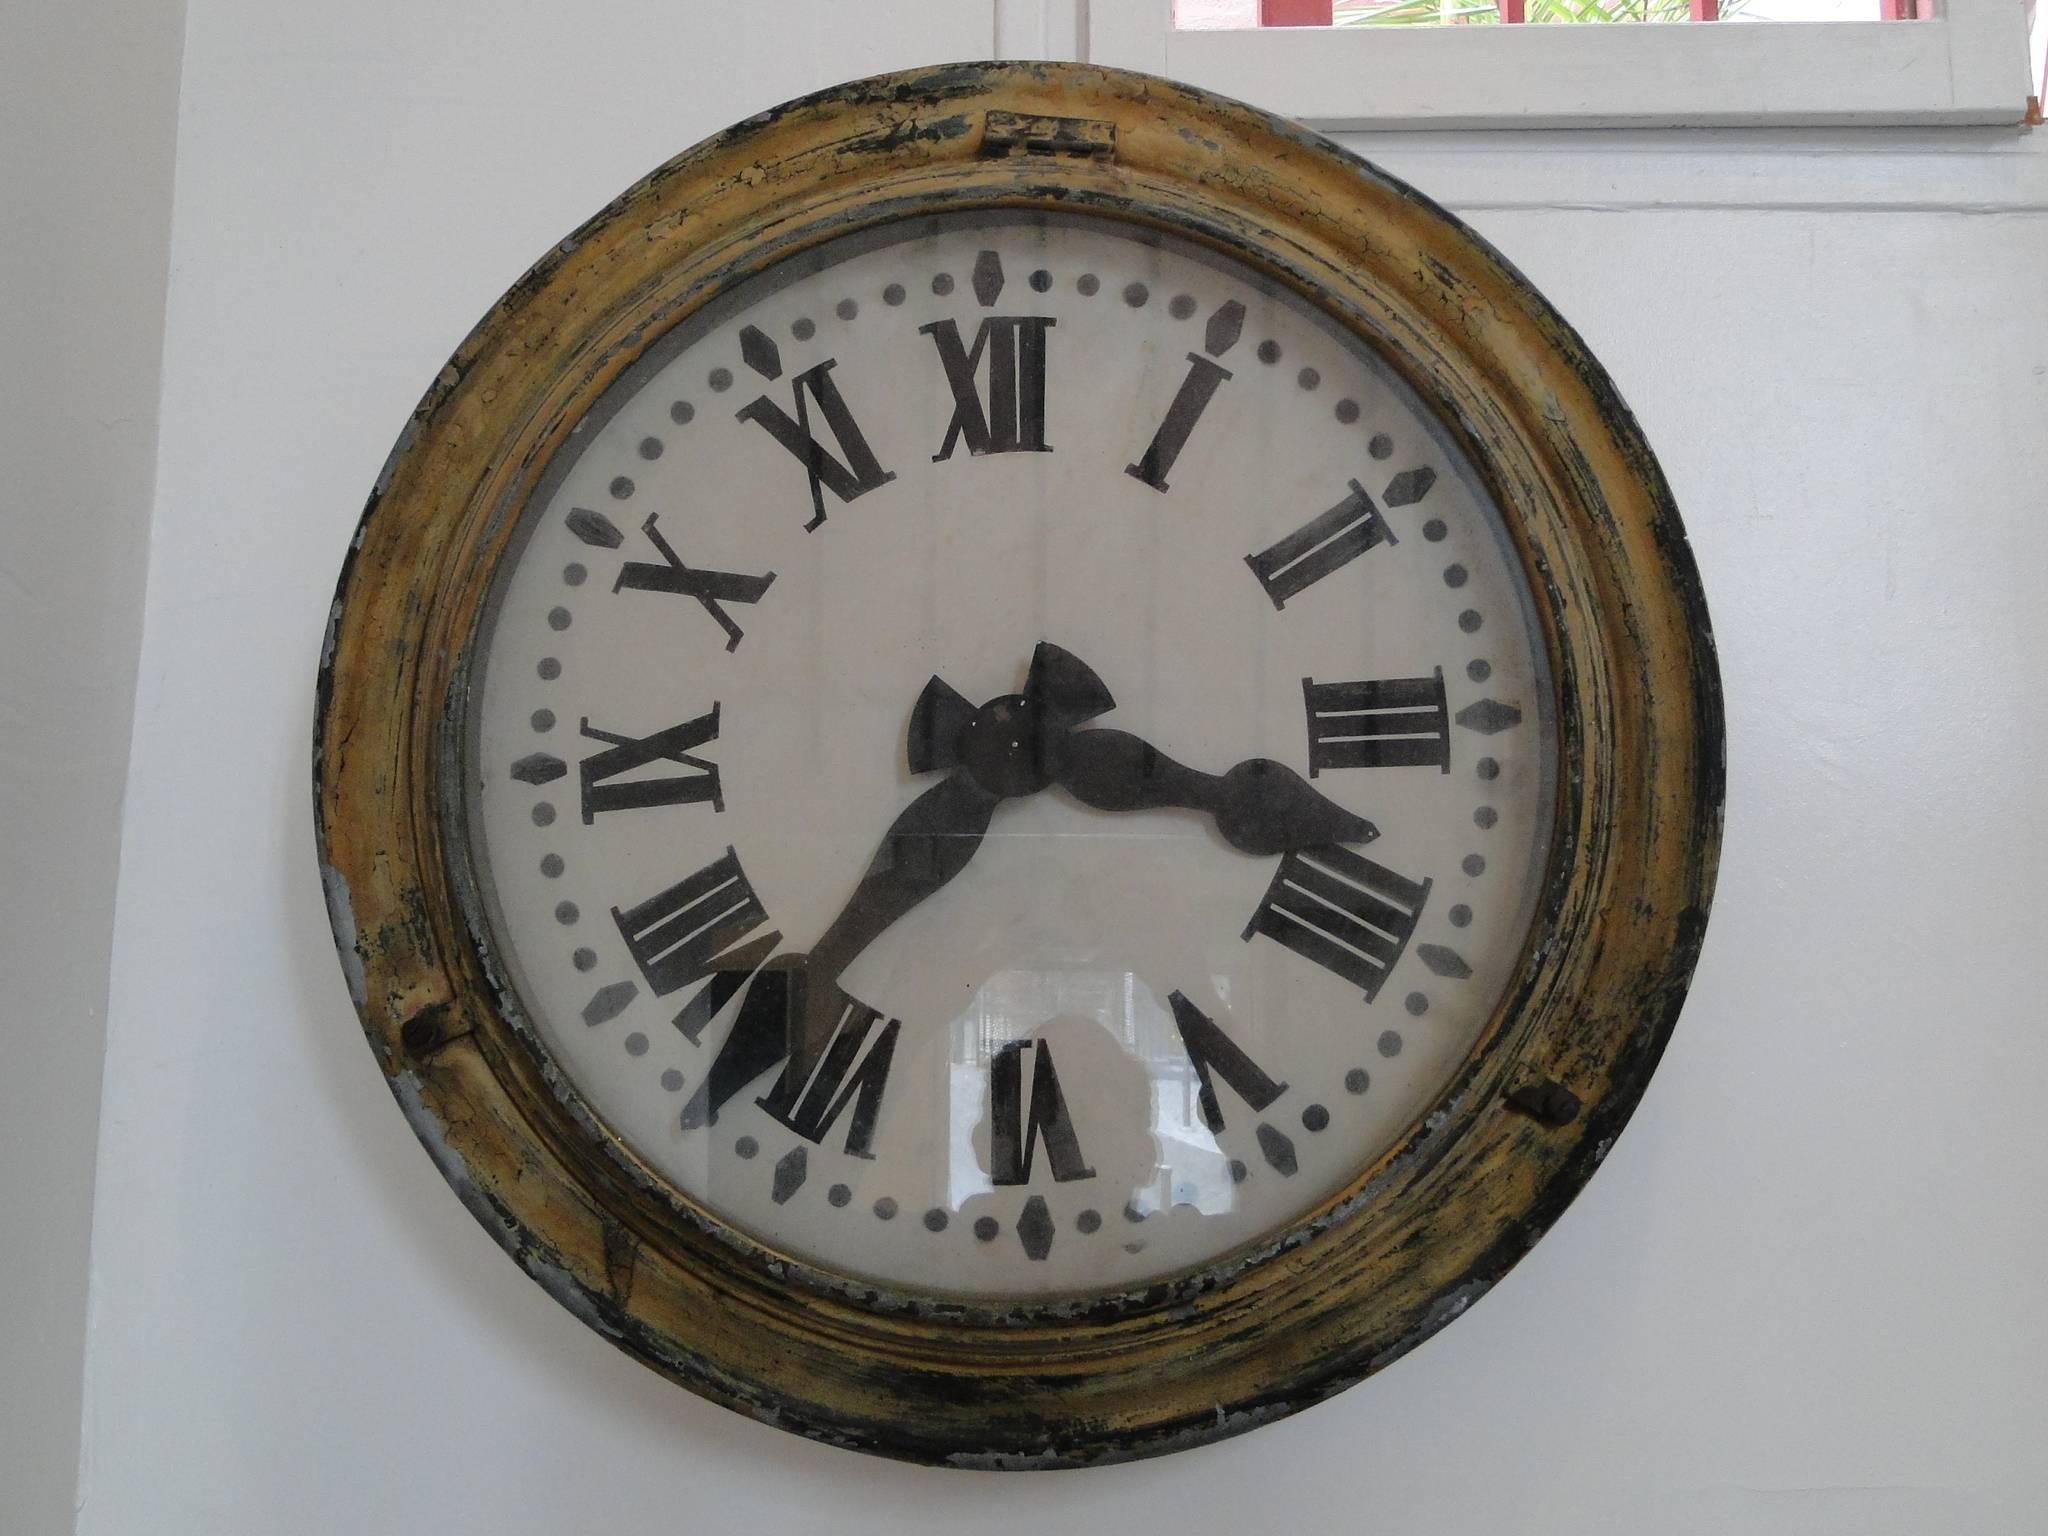 French Railway clock from the 1930s. Painted metal.